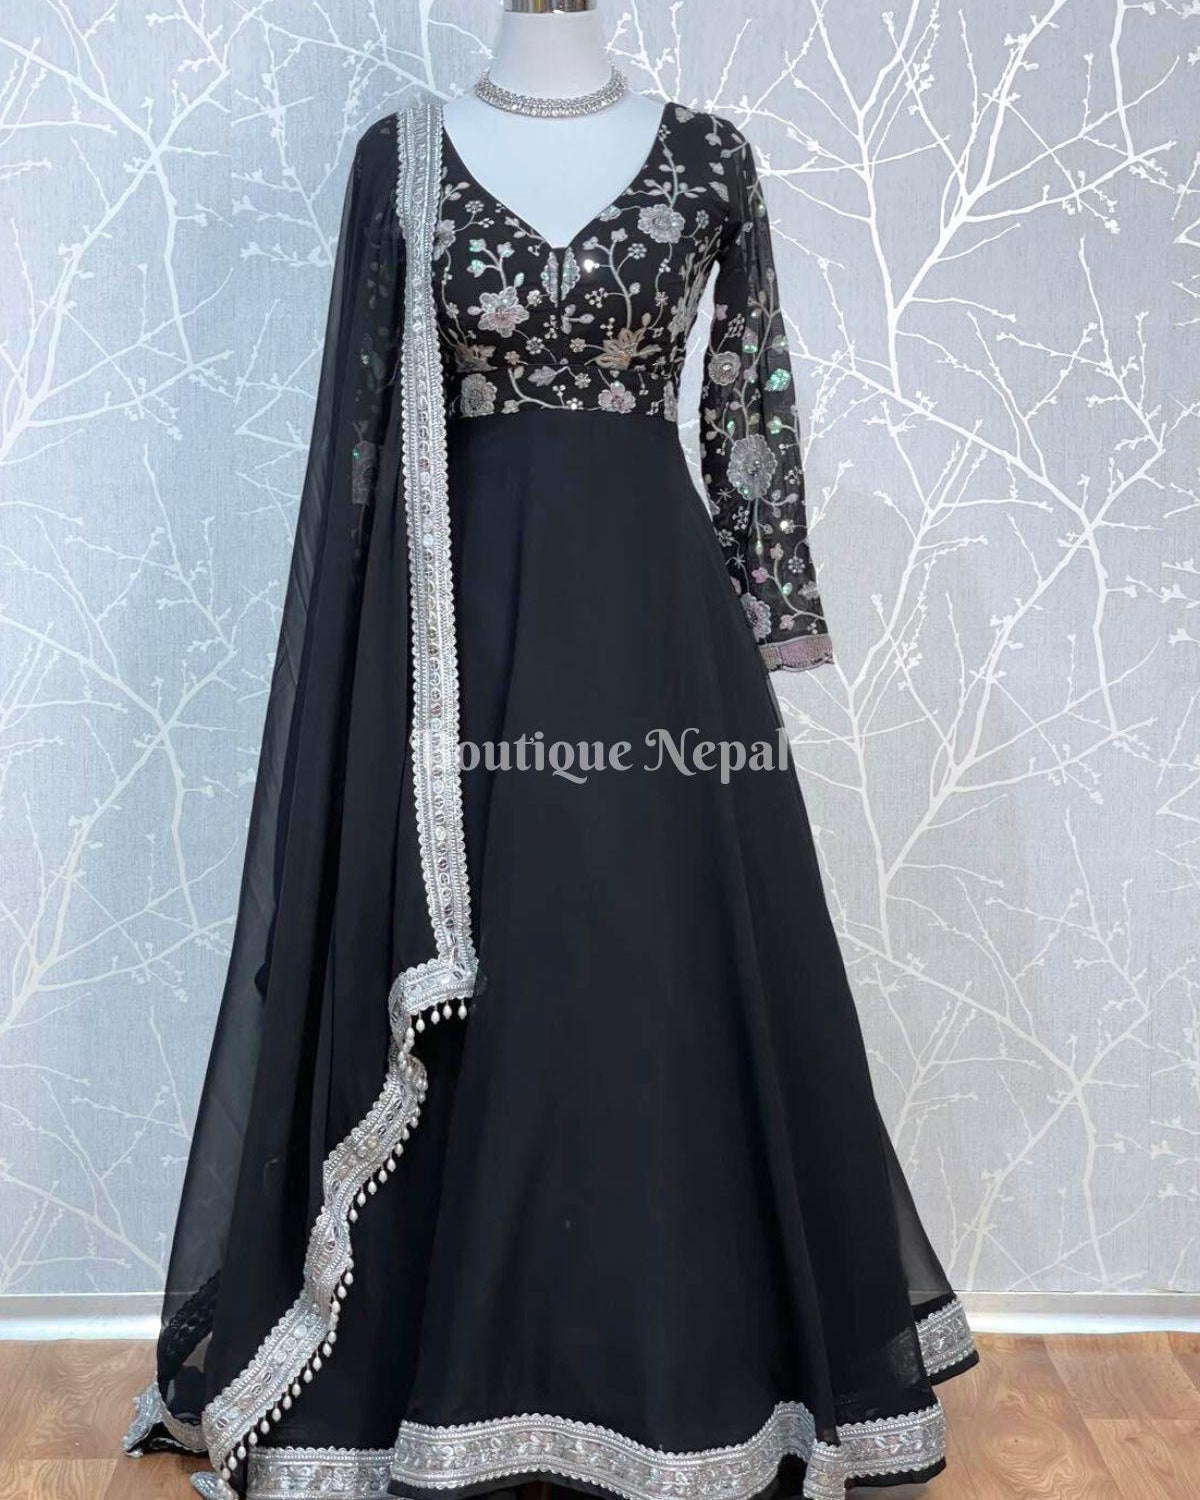 Full Sleeve Designer Gown In Black - Boutique Nepal Au